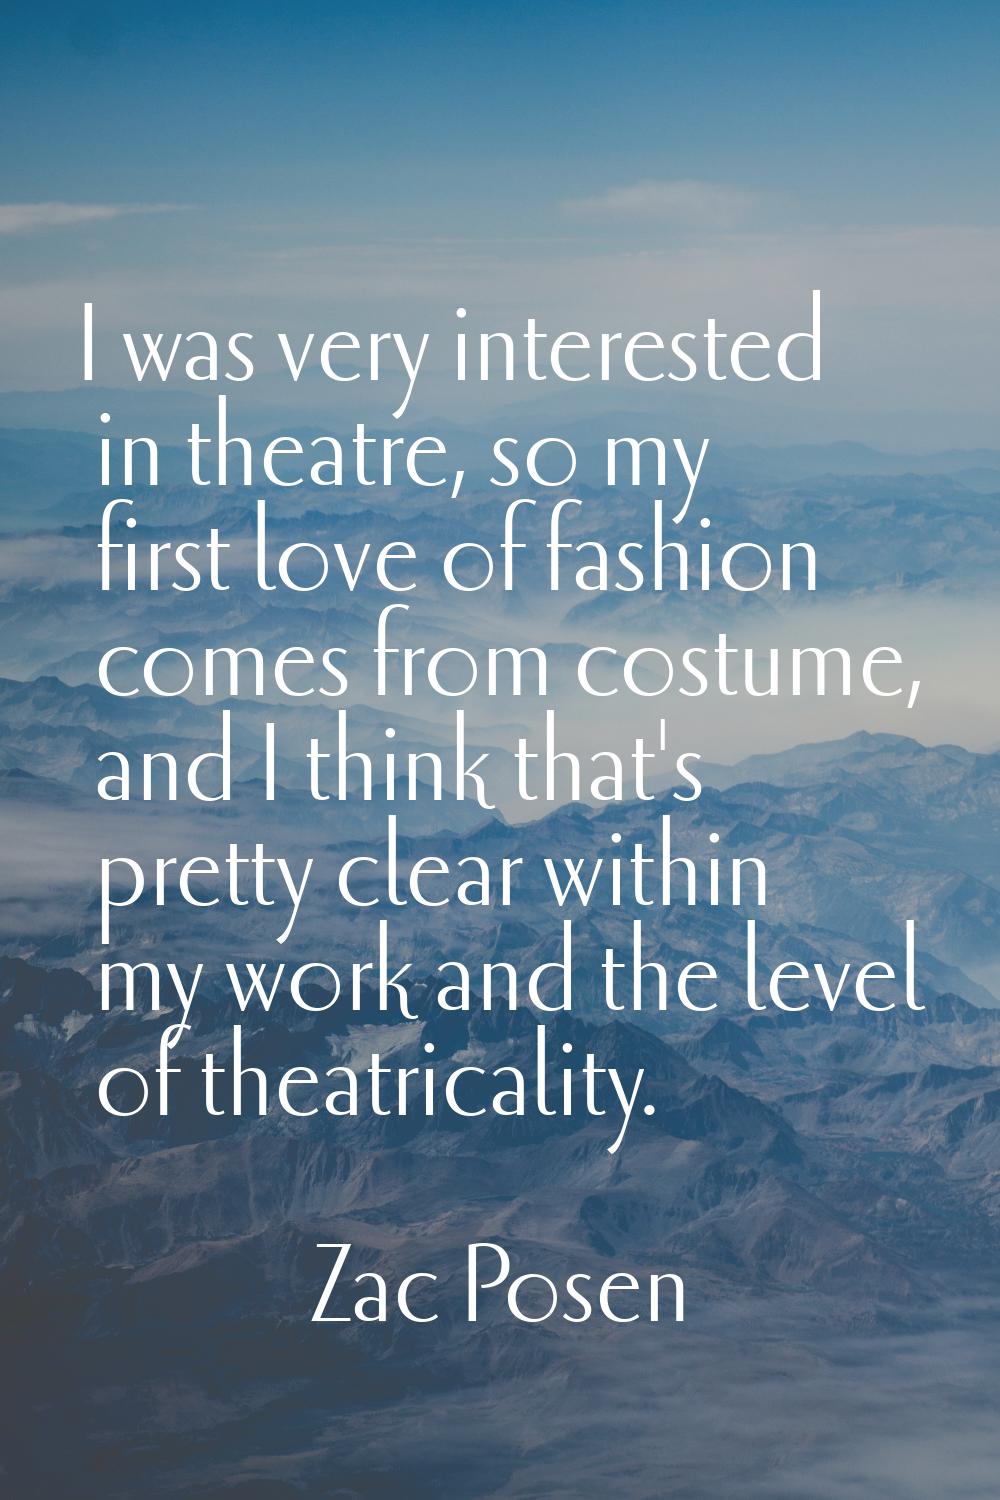 I was very interested in theatre, so my first love of fashion comes from costume, and I think that'